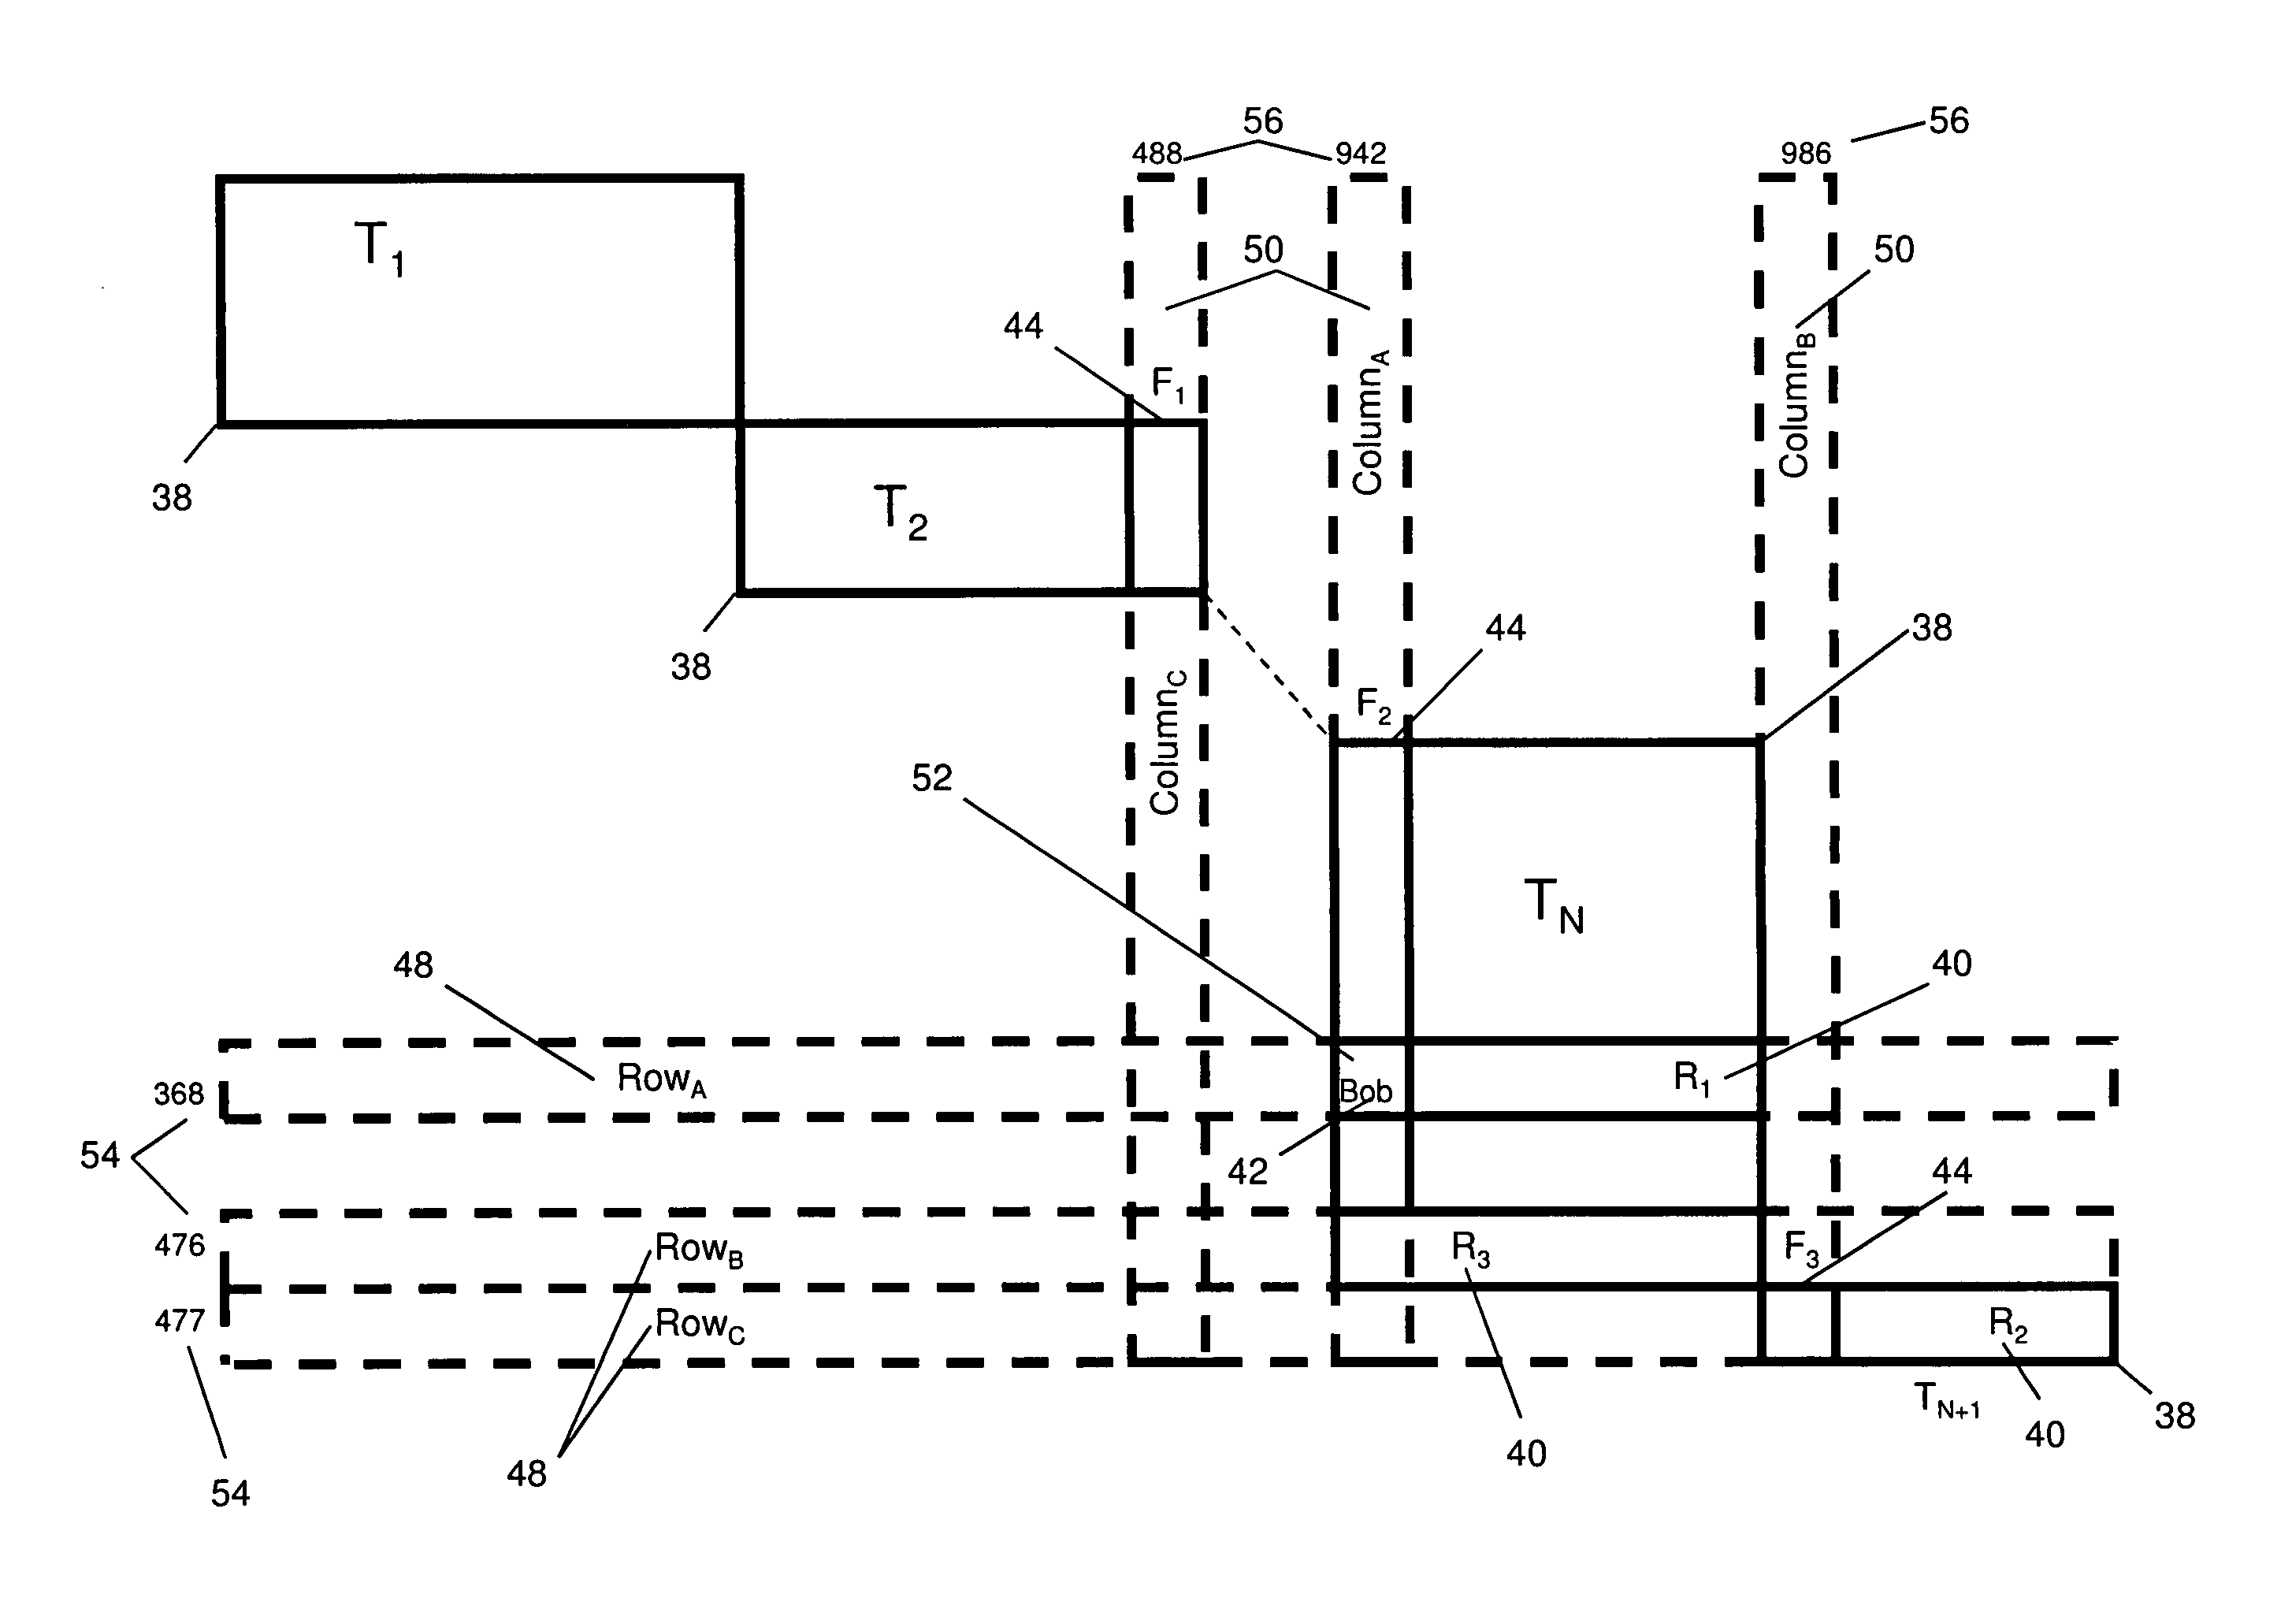 Two-dimensional data storage system